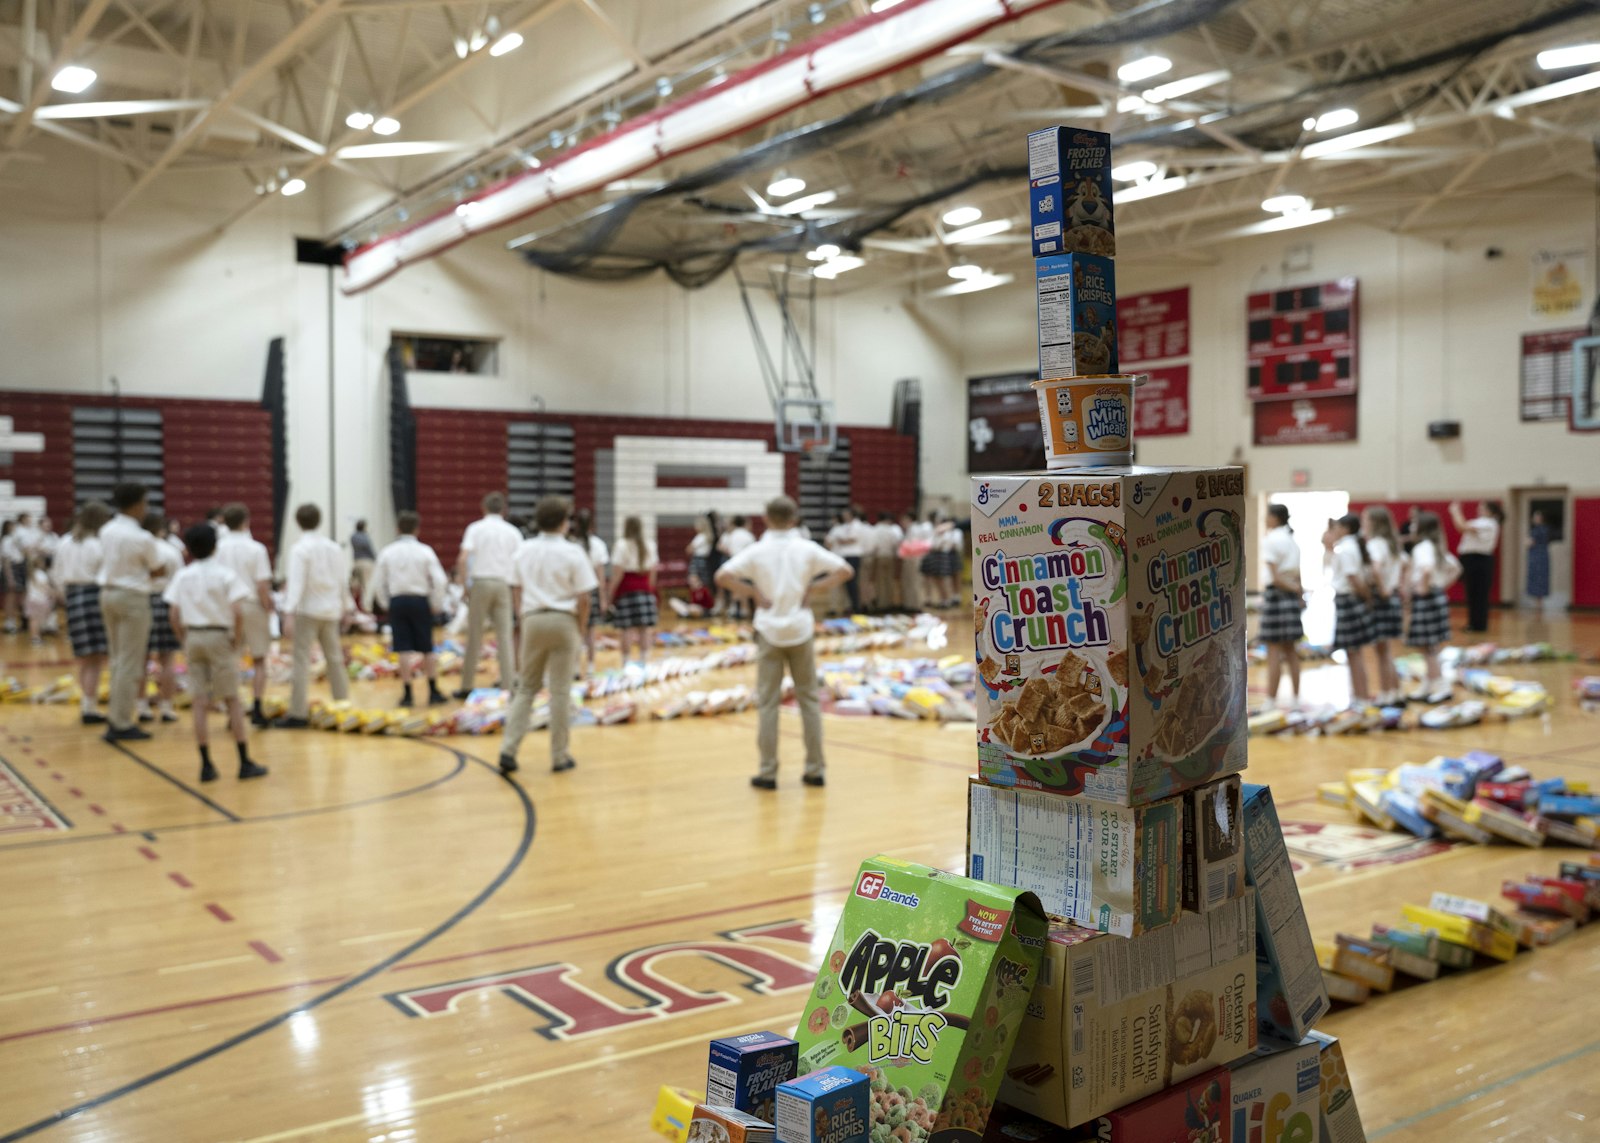 Word of the cereal drive spread after the effort was profiled in the Grosse Pointe community newspaper, Kesteloot said.